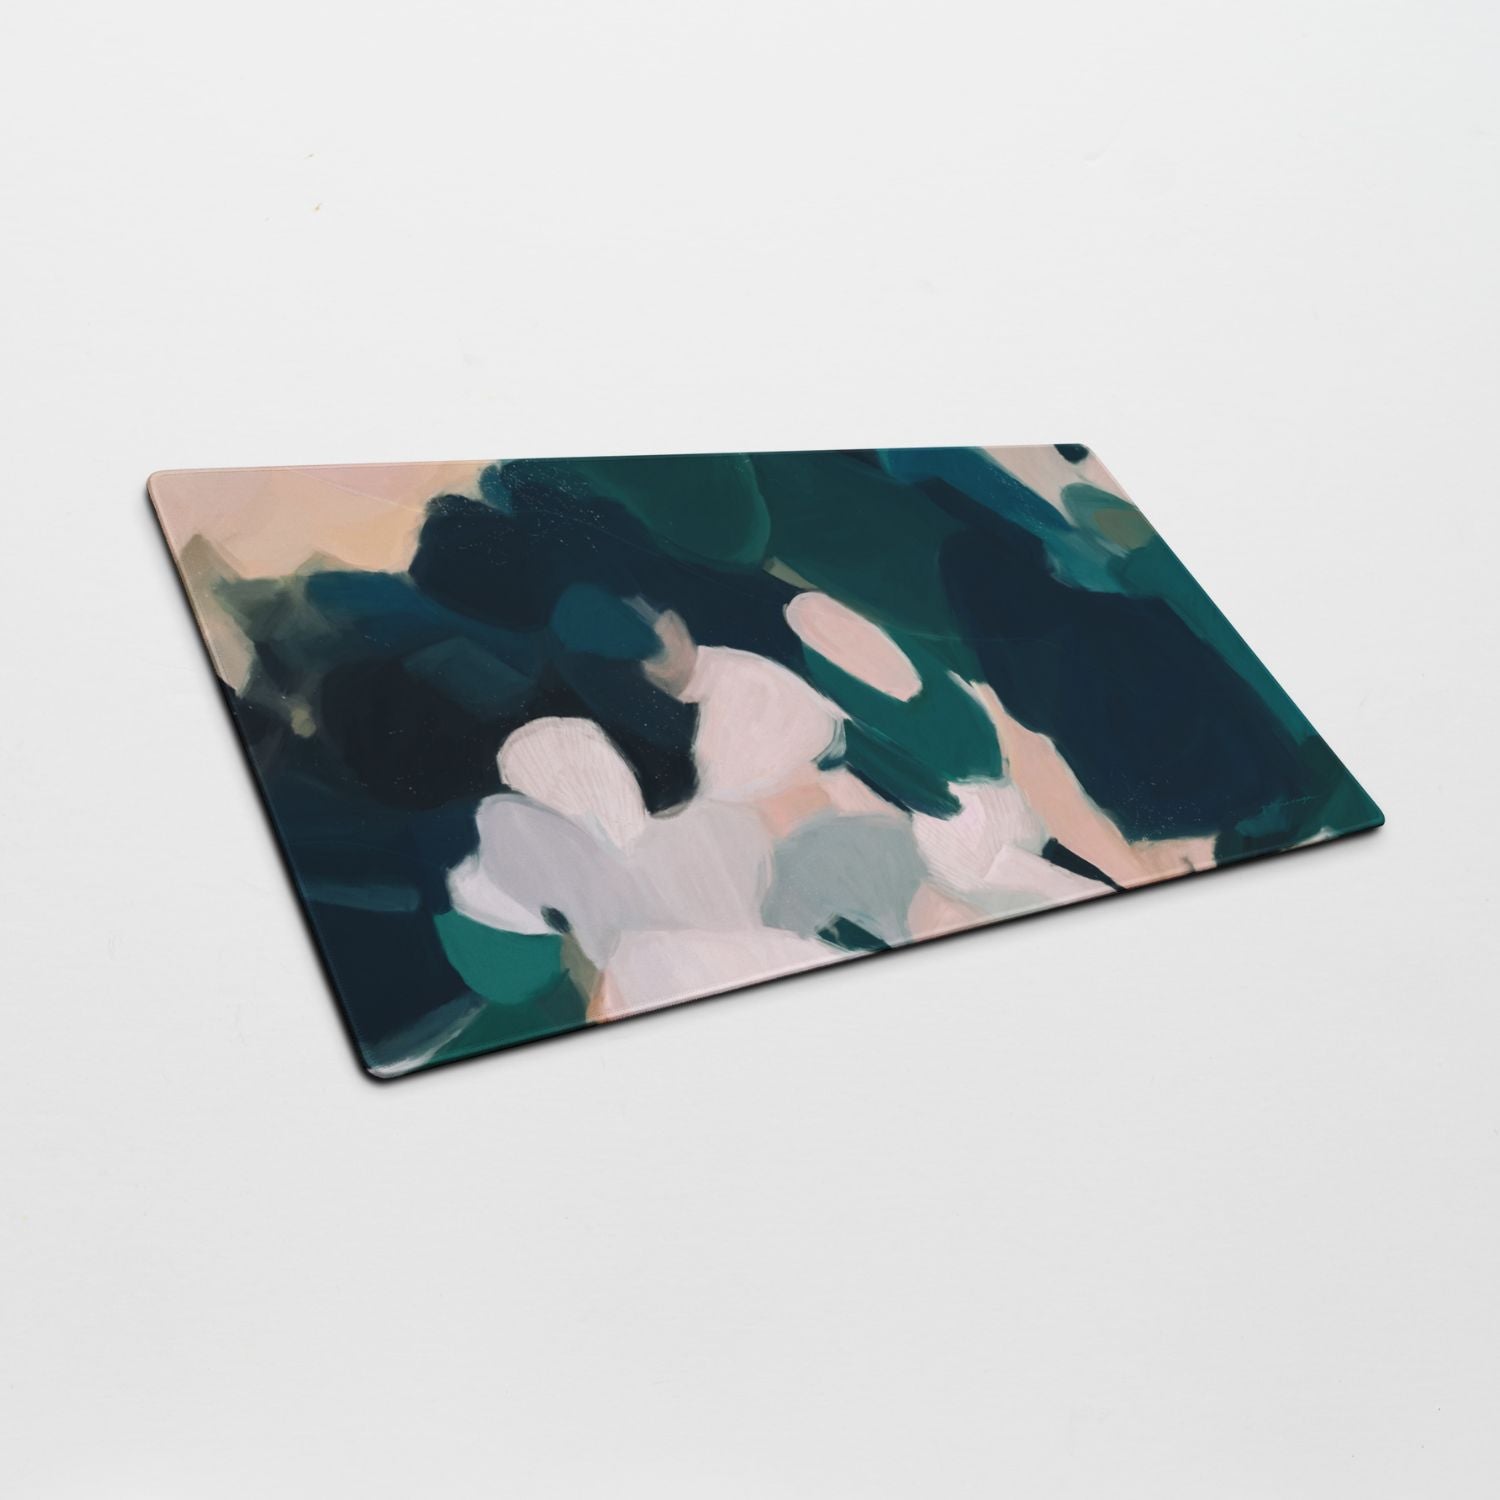 Aerwyn, colorful mouse pad for styling your office desk. Featuring artwork by Parima Studio. Home office styling accessories, cubicle styling accessories.